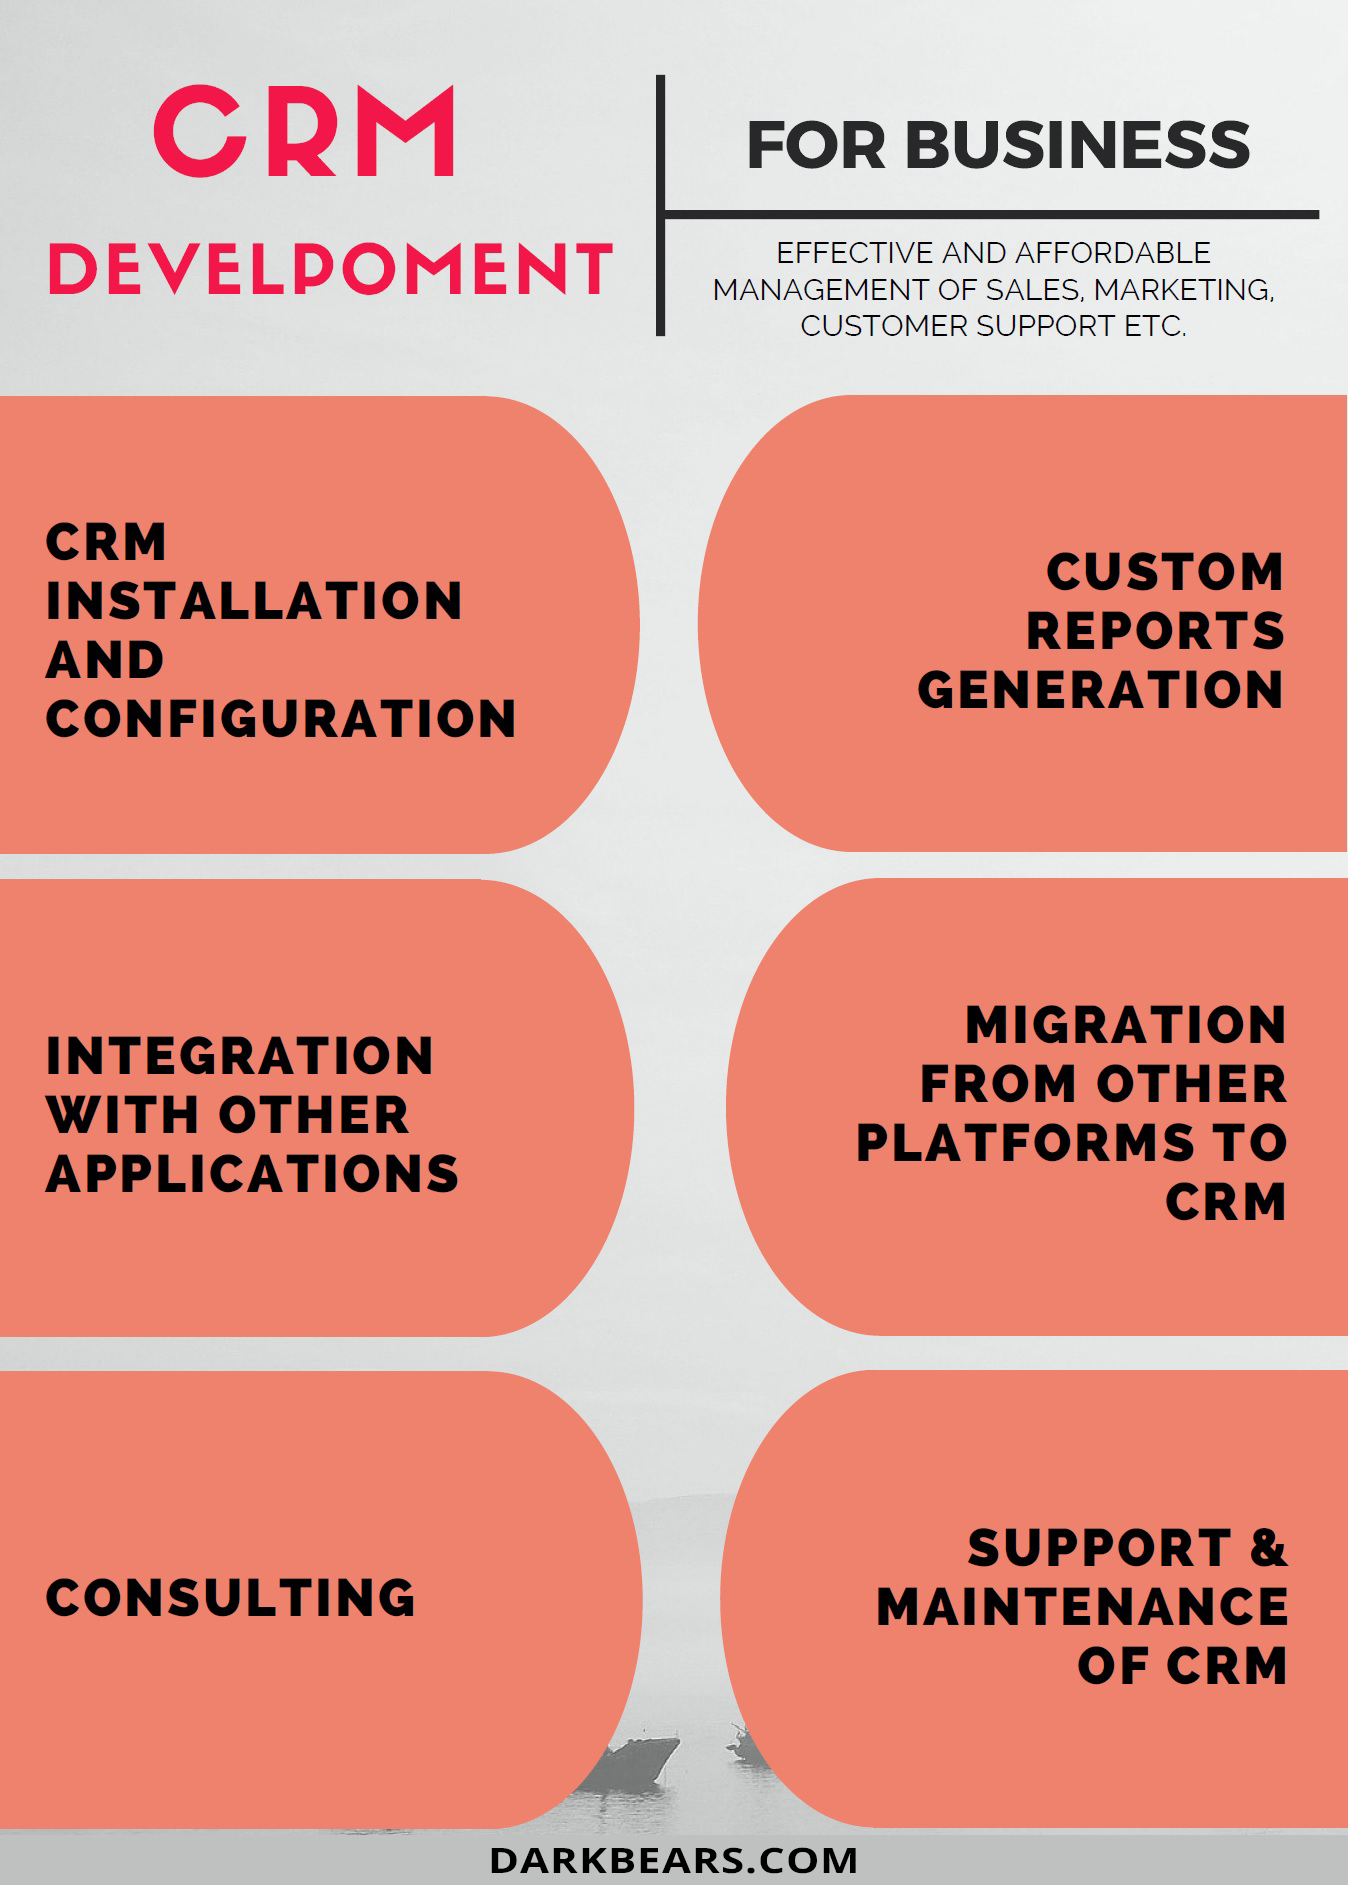 CRM Development For Business